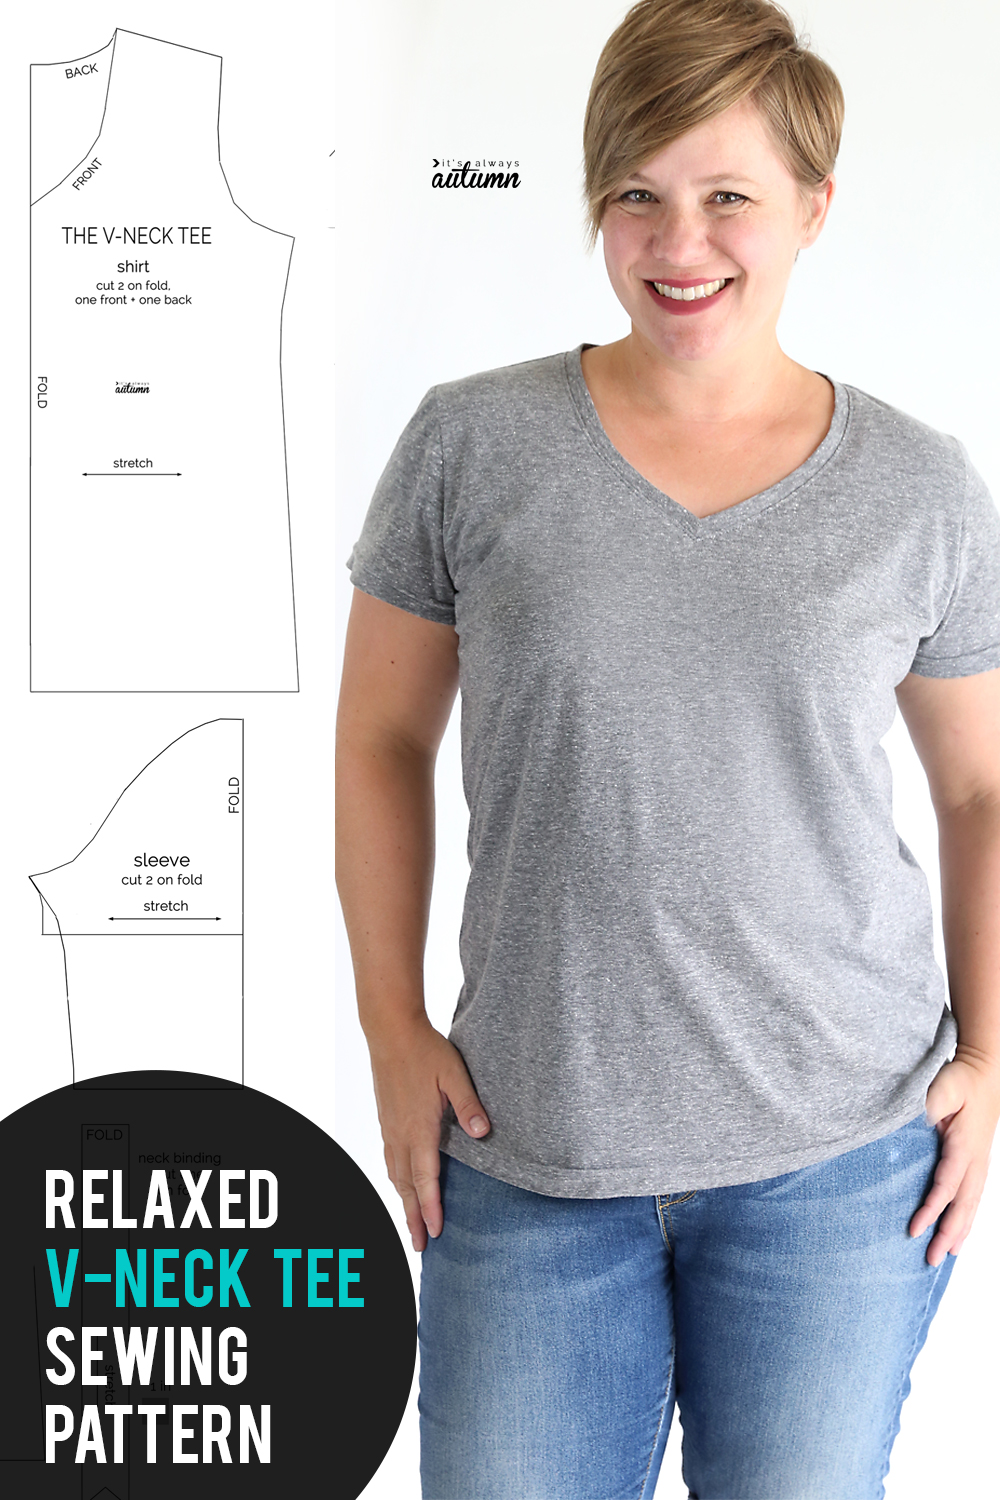 How to cut the neck off a sweater - Cut a sweater into a scoop neck - How  to make a scoop neckline 